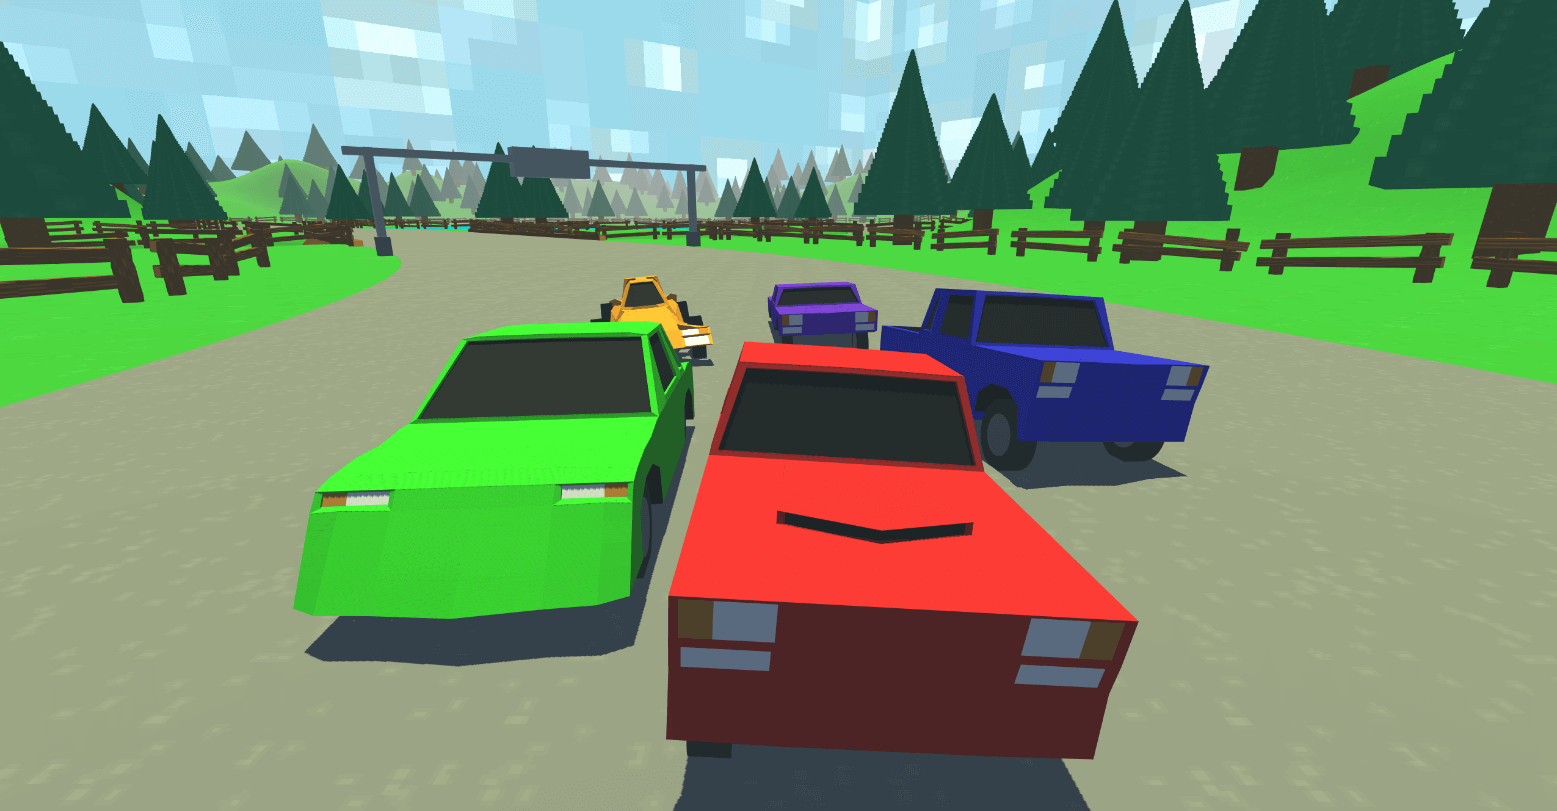 An image of my racing game, with cars moving towards the camera